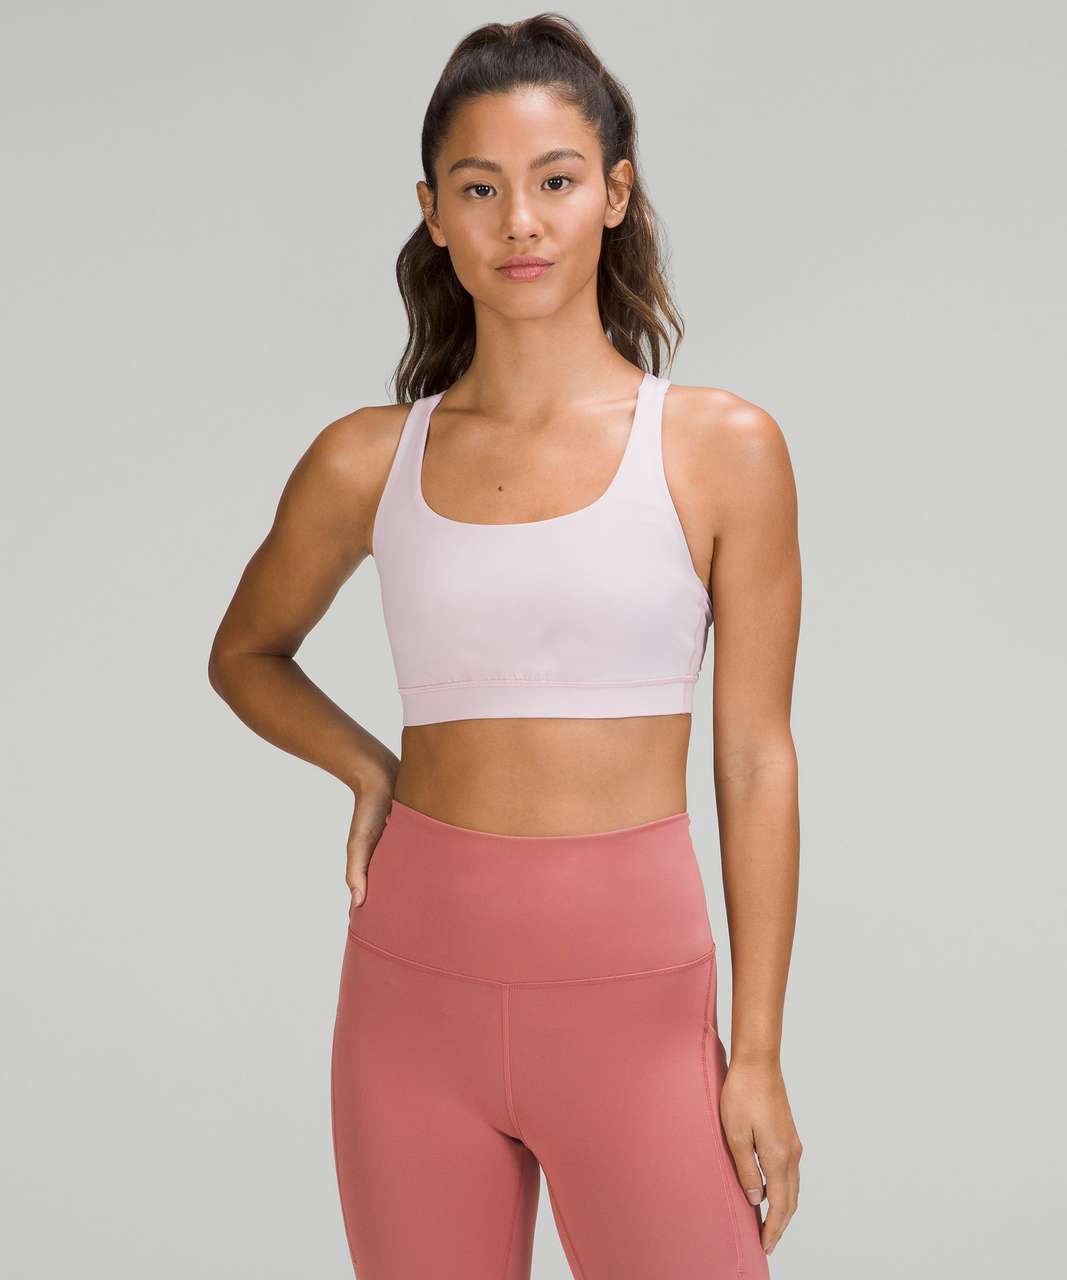 NEW! Lululemon Free To Be Serene Cross Back Sports Bra Authentic Size 6  Pink Peony, Women's Fashion, Activewear on Carousell